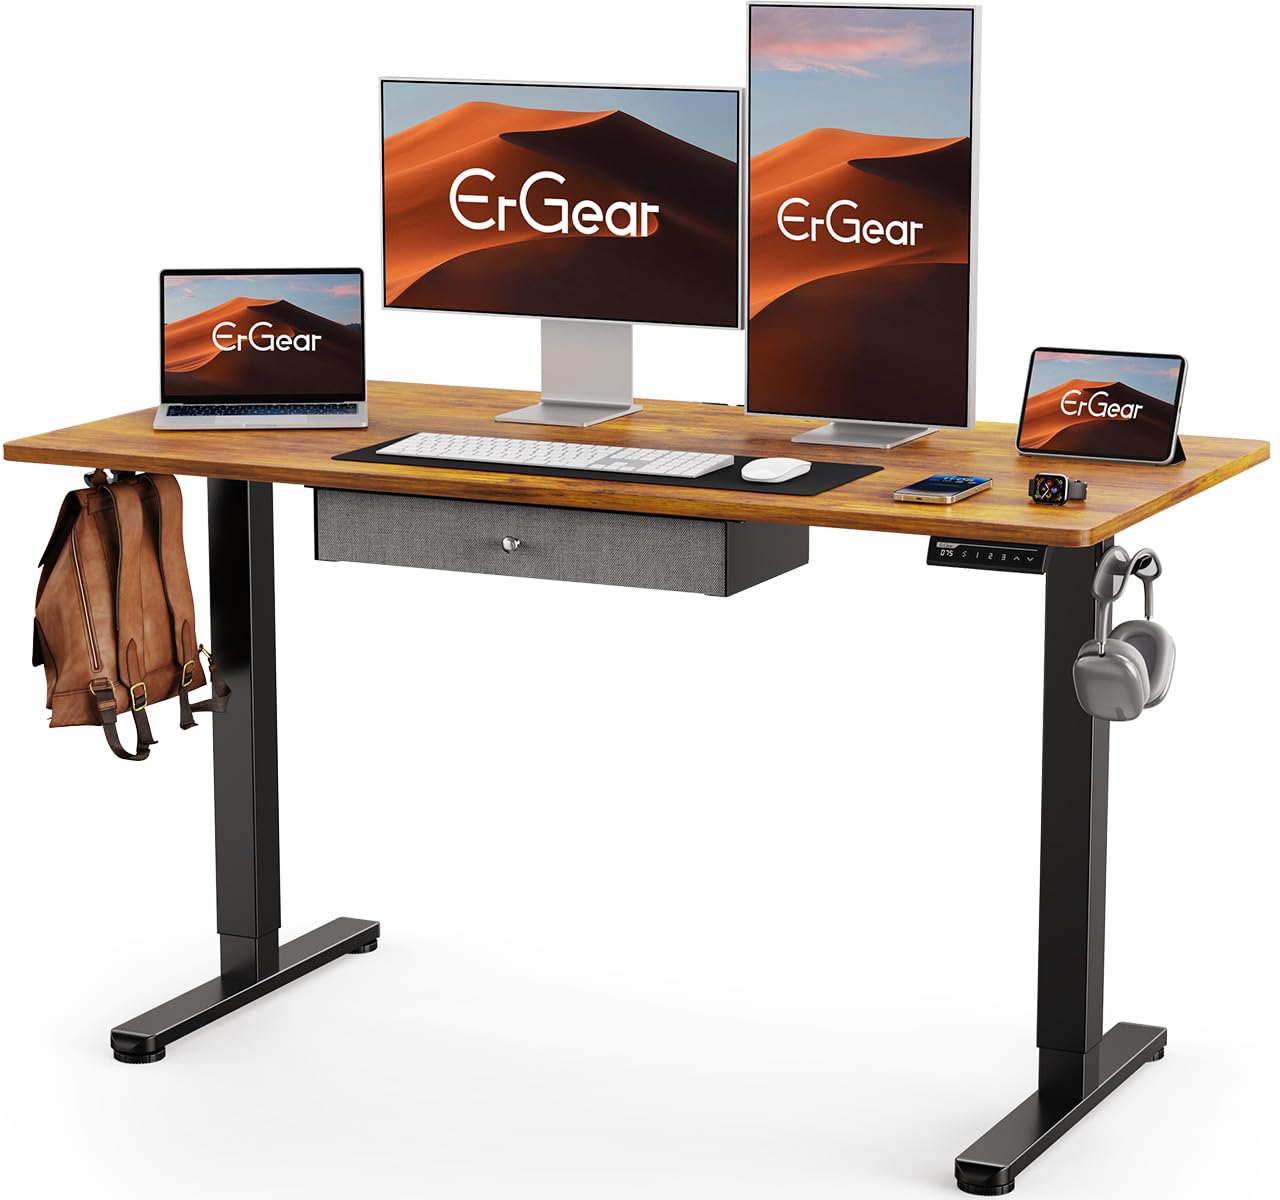 ErGear Electric Standing Desk with Drawer, Adjustable Height Sit Stand Up Desk, Home Office Desk Computer Workstation, 48x24 Inches, Vintage Brown